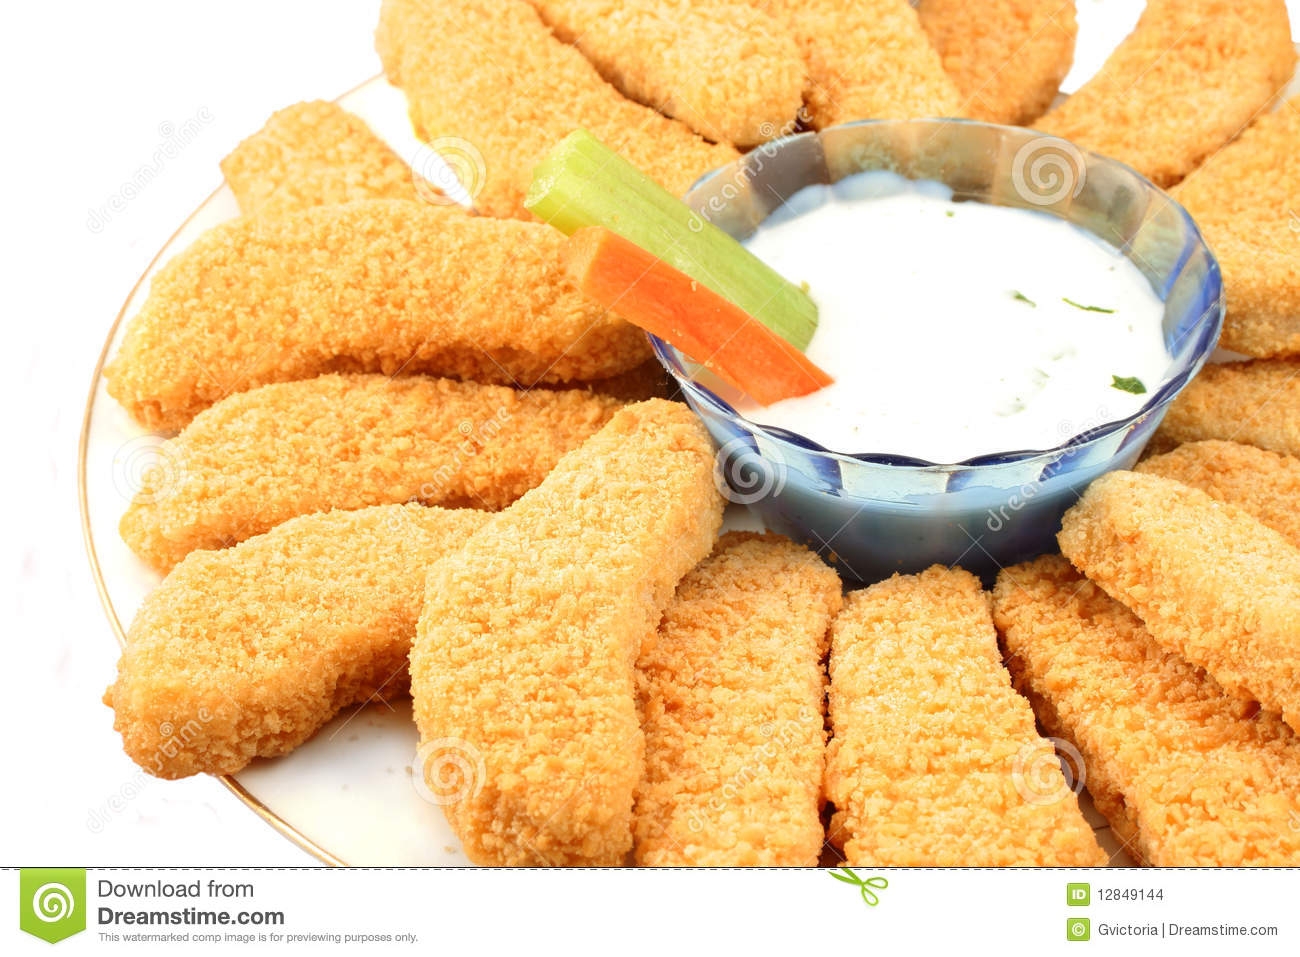     Crispy Chicken Fingers With Vegetables And Dip On A White Background